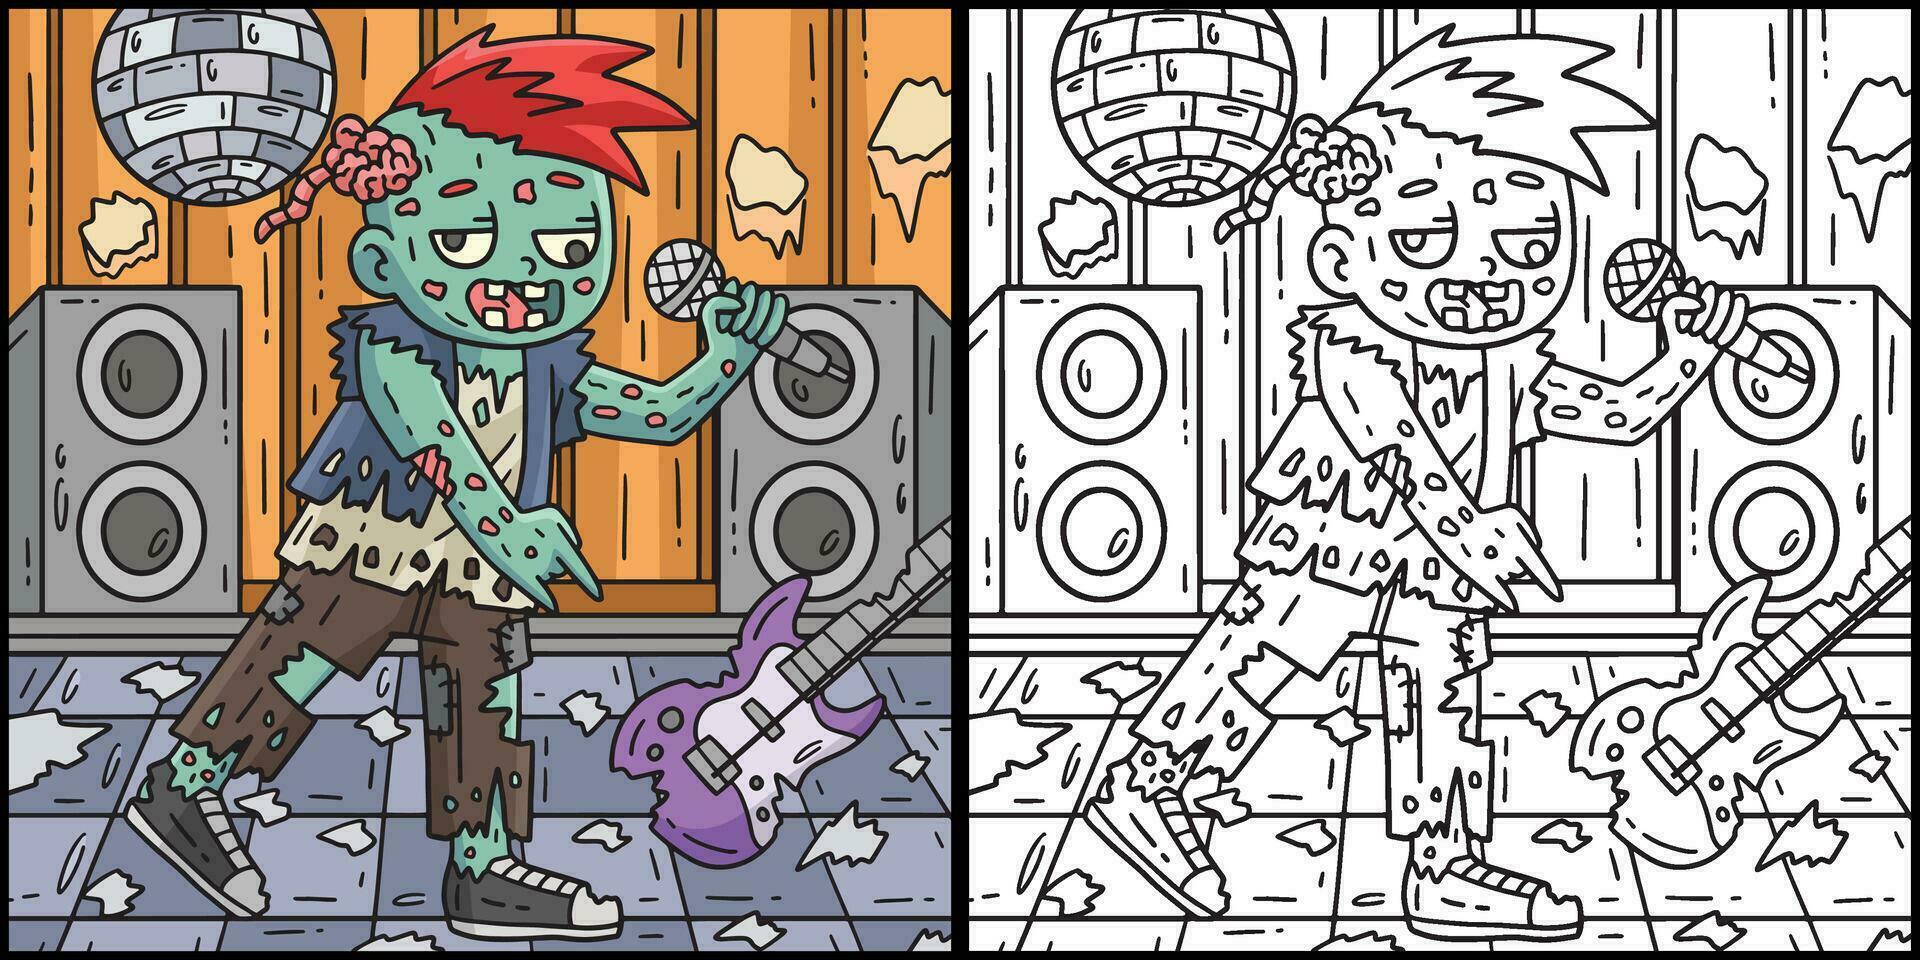 Zombie Rocker Coloring Page Colored Illustration vector